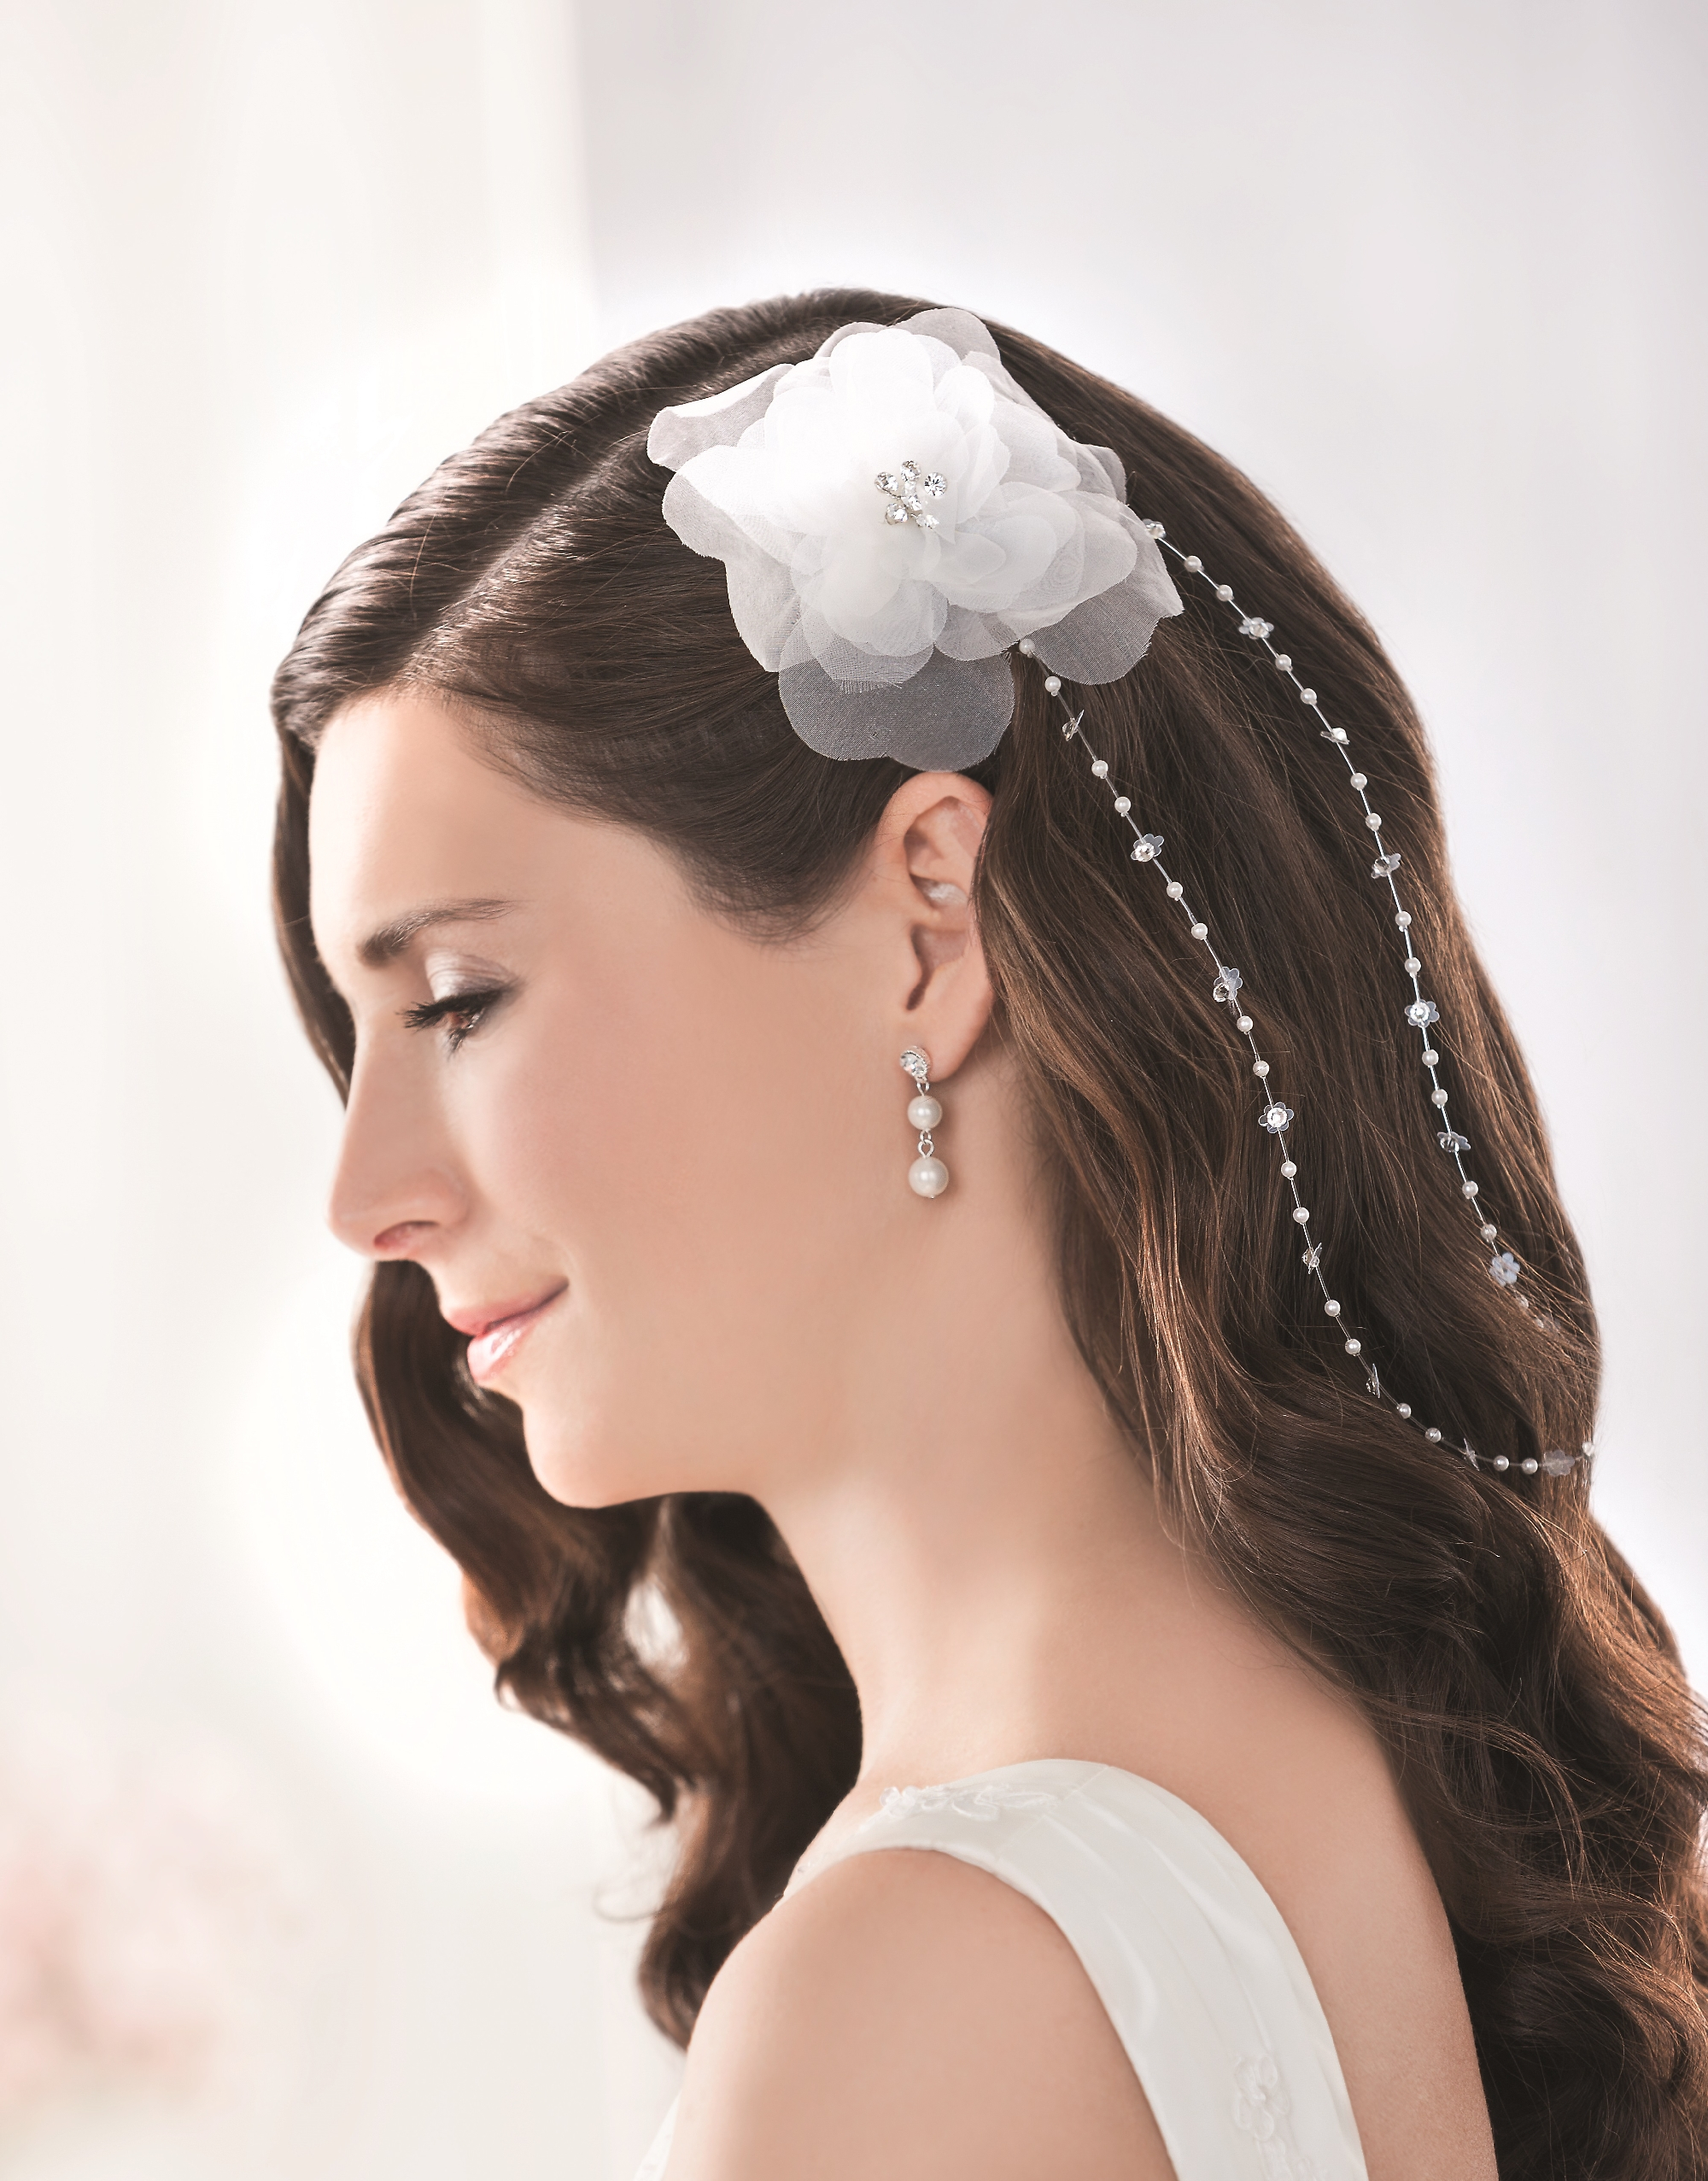 Emmerling Hair Accessory 20164